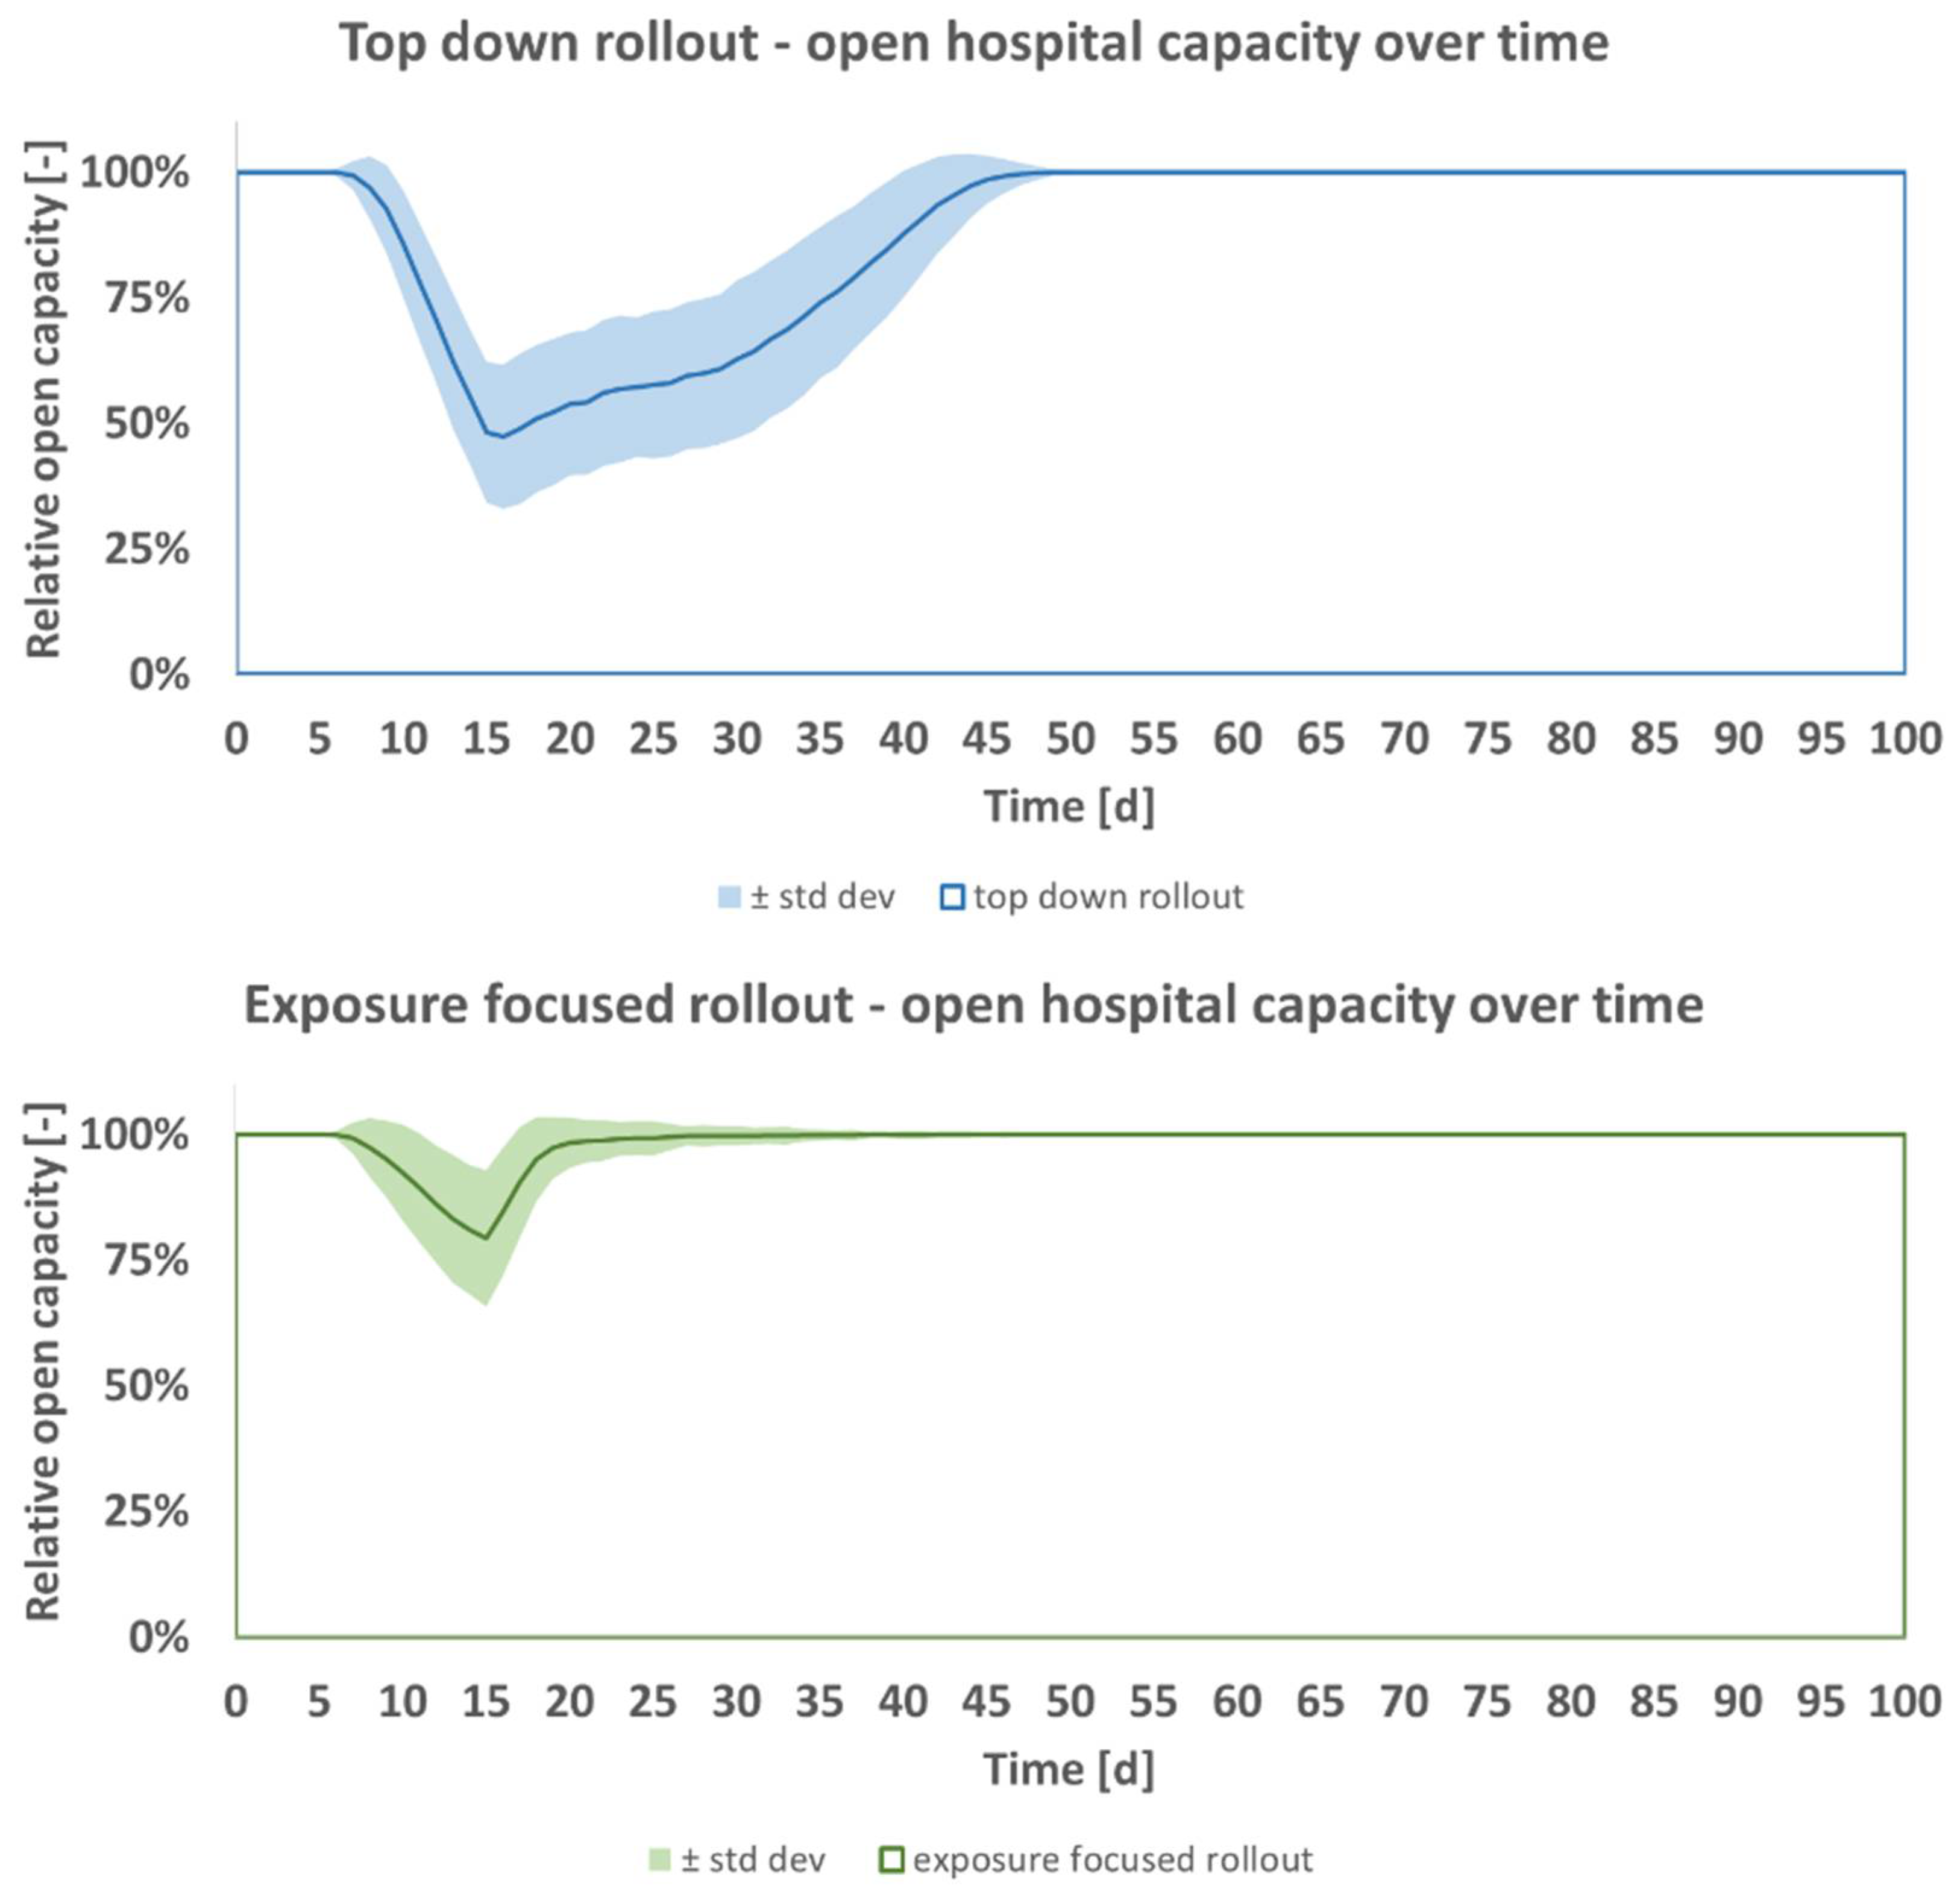 Vaccines | Free Full-Text | Maximization of Open Hospital Capacity under  Shortage of SARS-CoV-2 Vaccines—An Open Access, Stochastic Simulation Tool